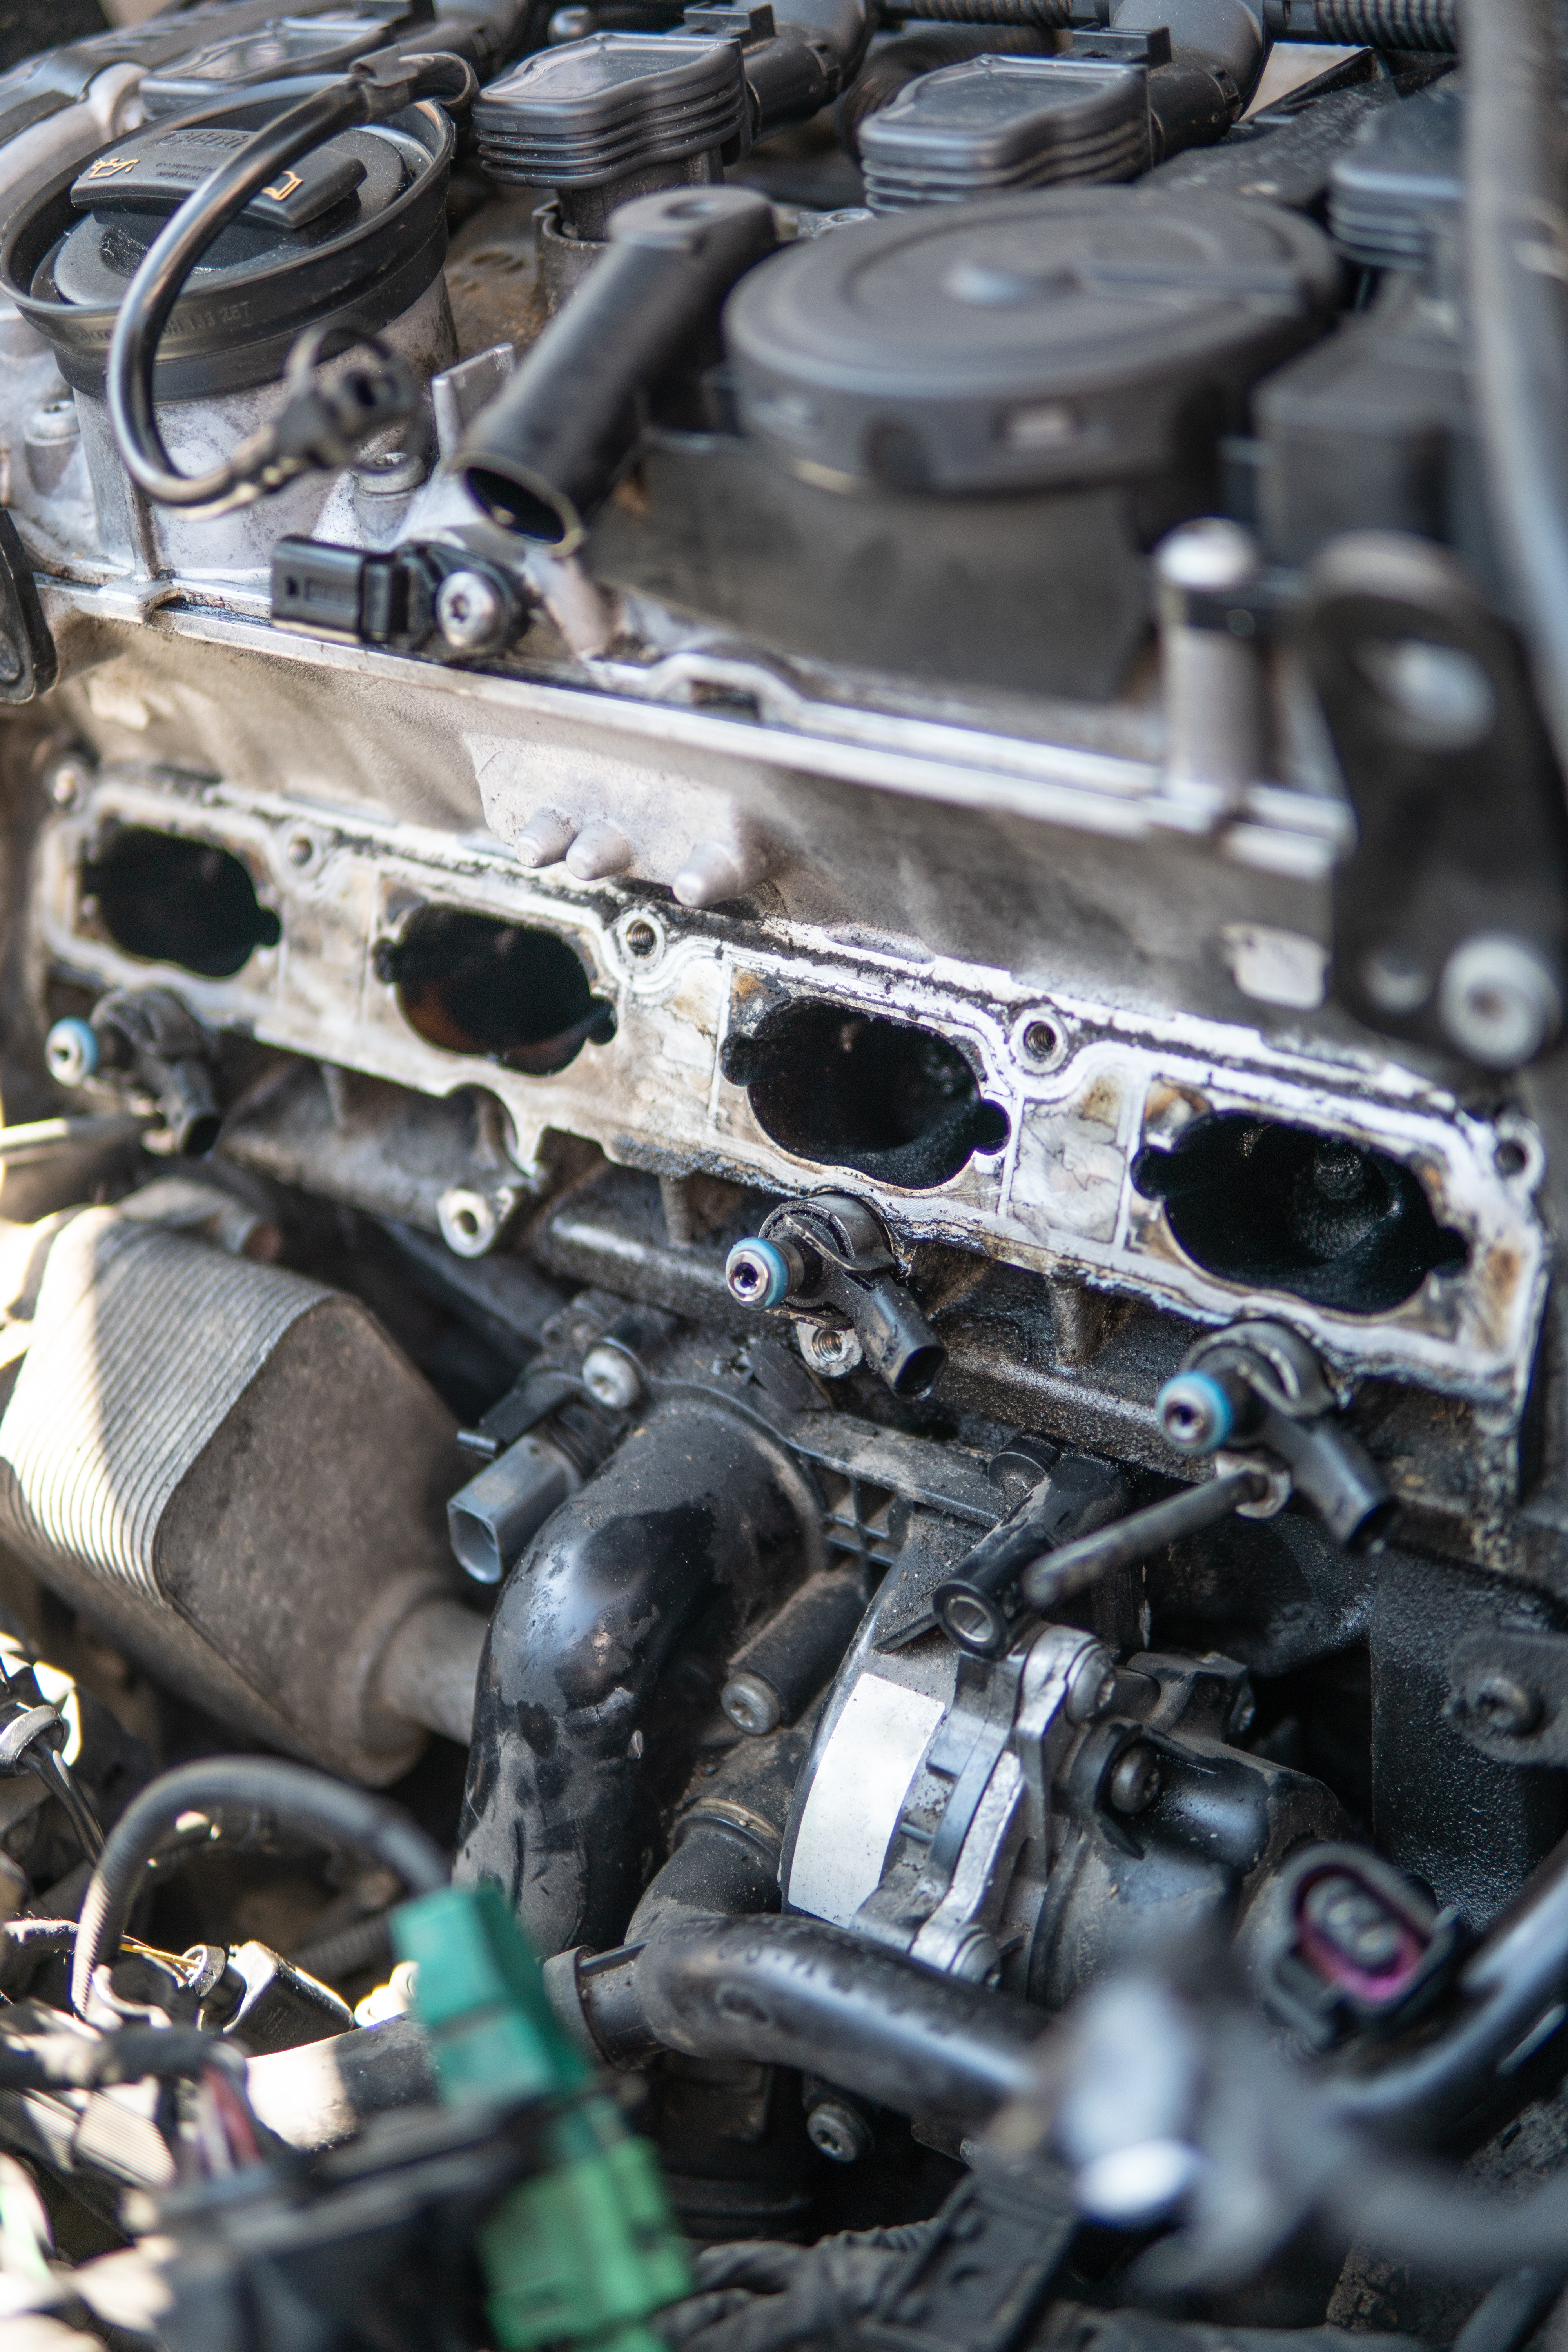 An image of a dirty intake manifold but DPF Alternatives can help with our expert intake manifold cleaning service in Fort Myers, FL.